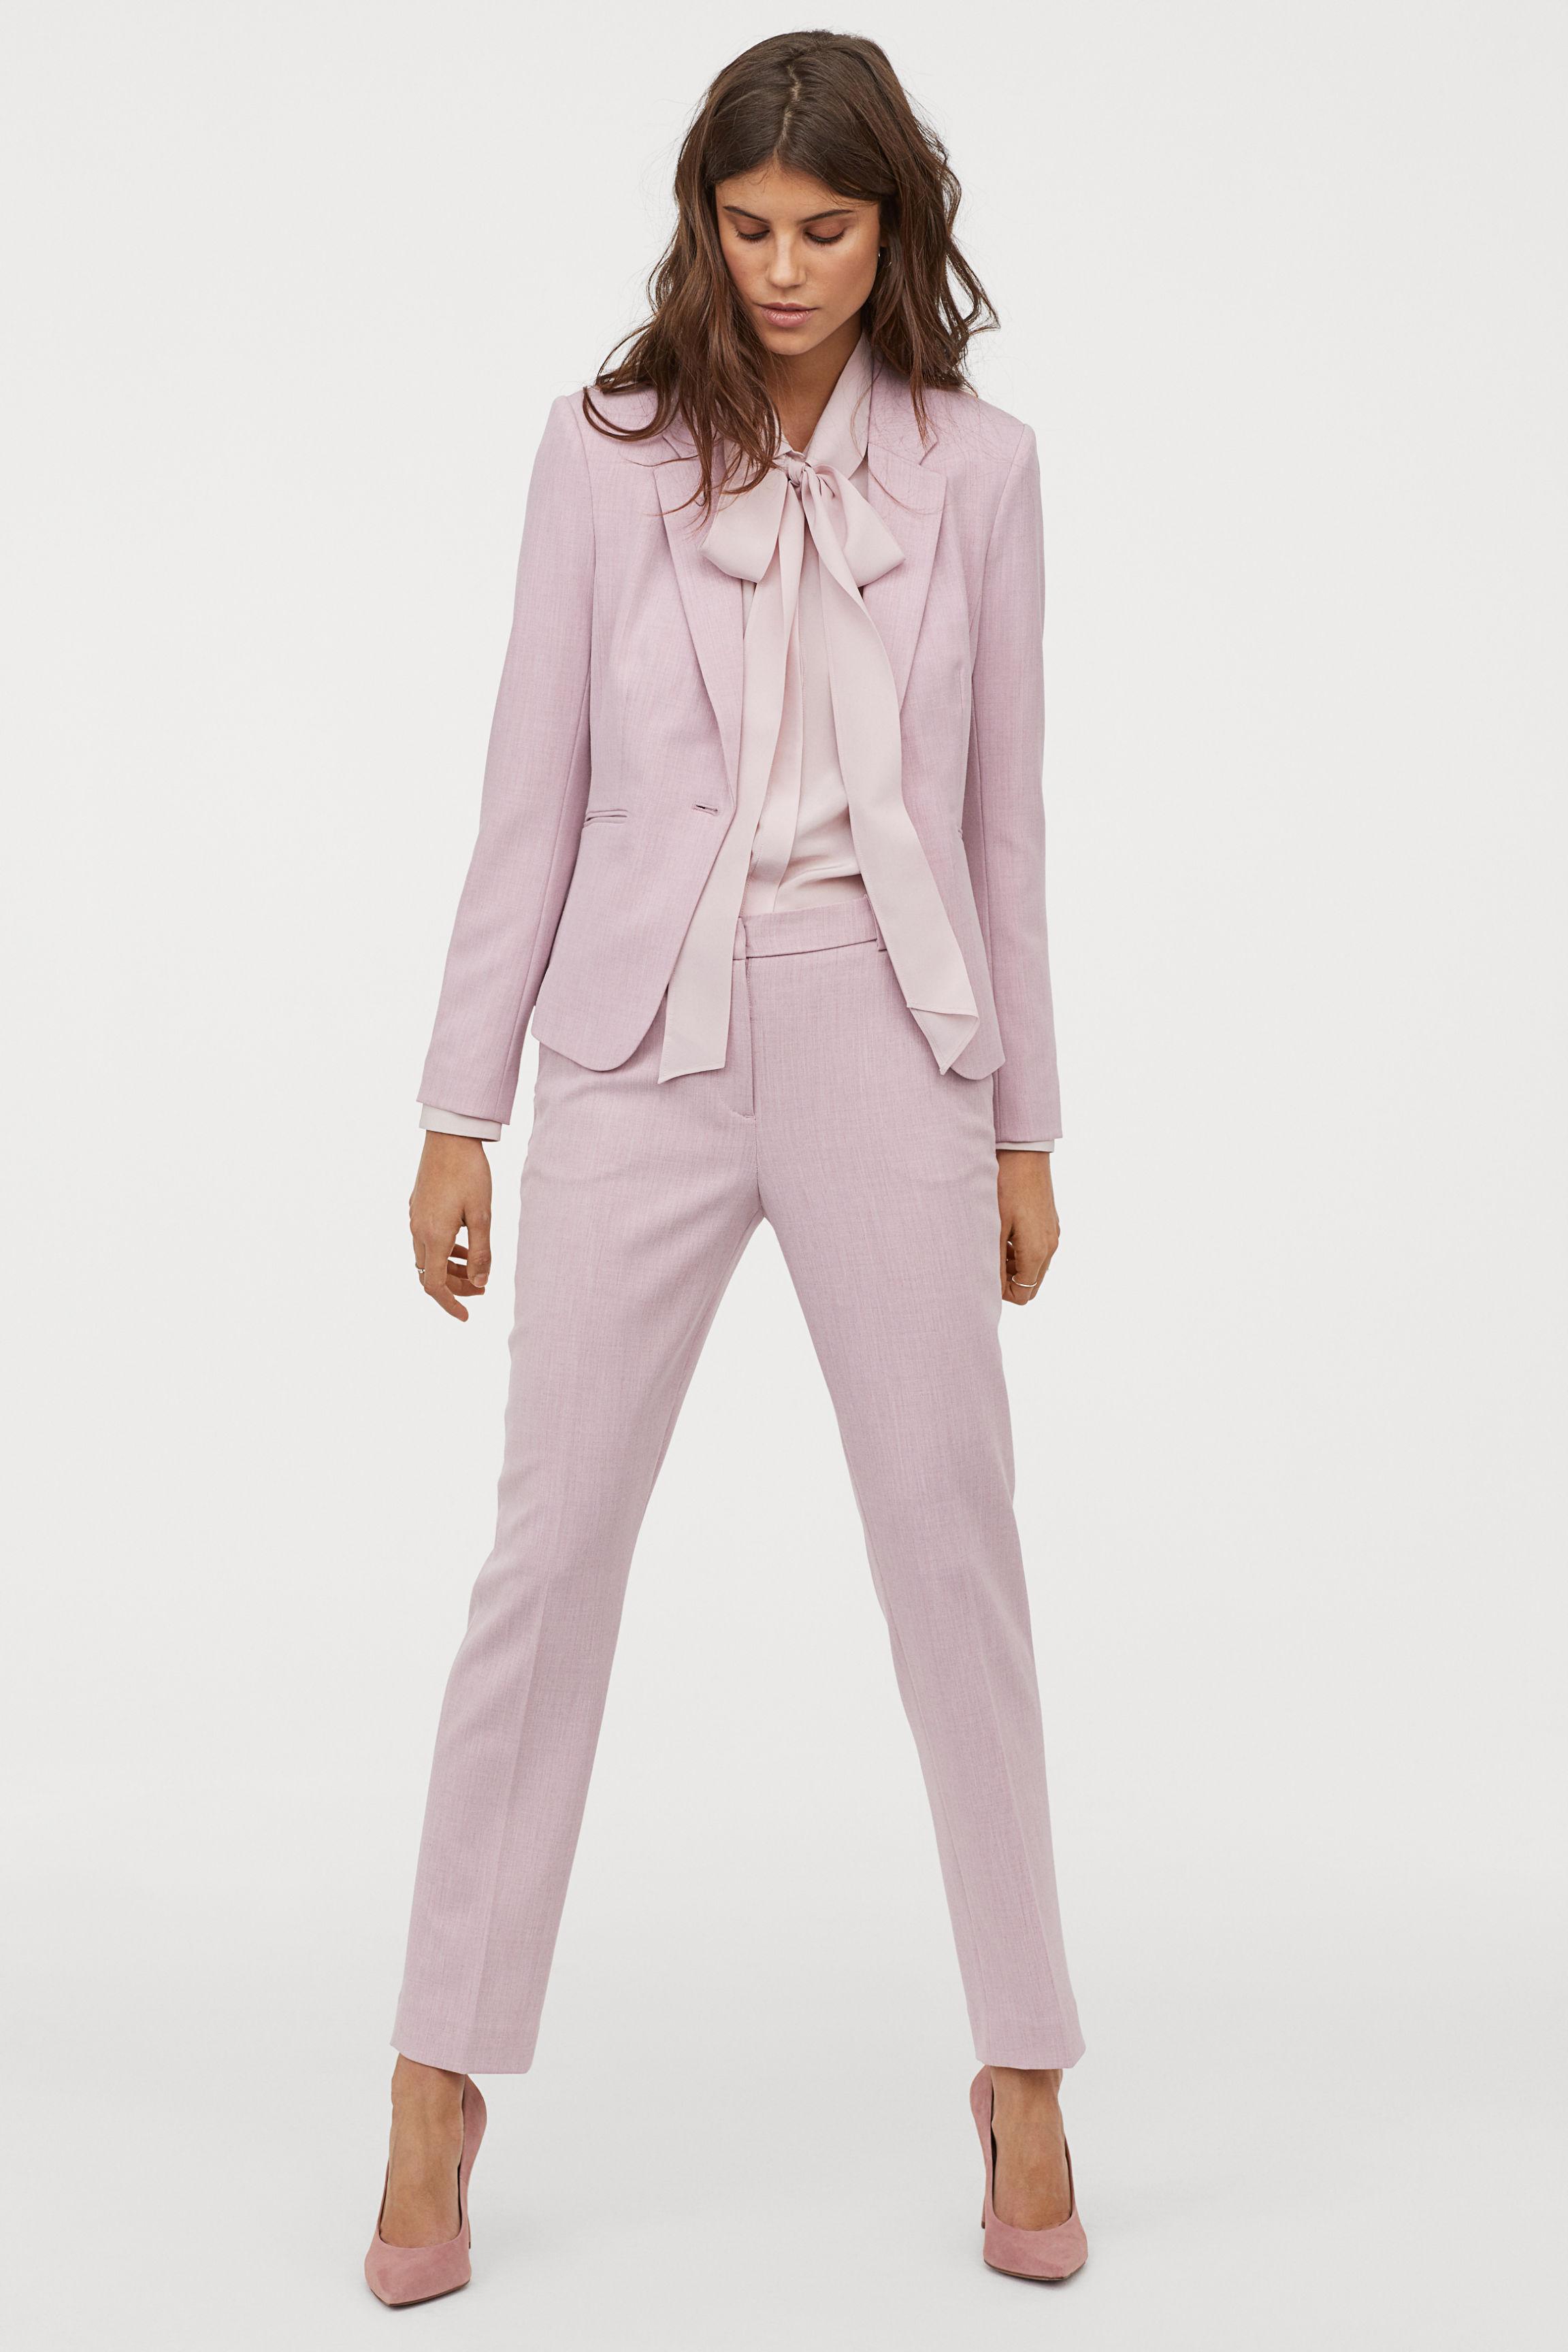 H&M Synthetic Suit Pants in Powder Pink (Pink) | Lyst